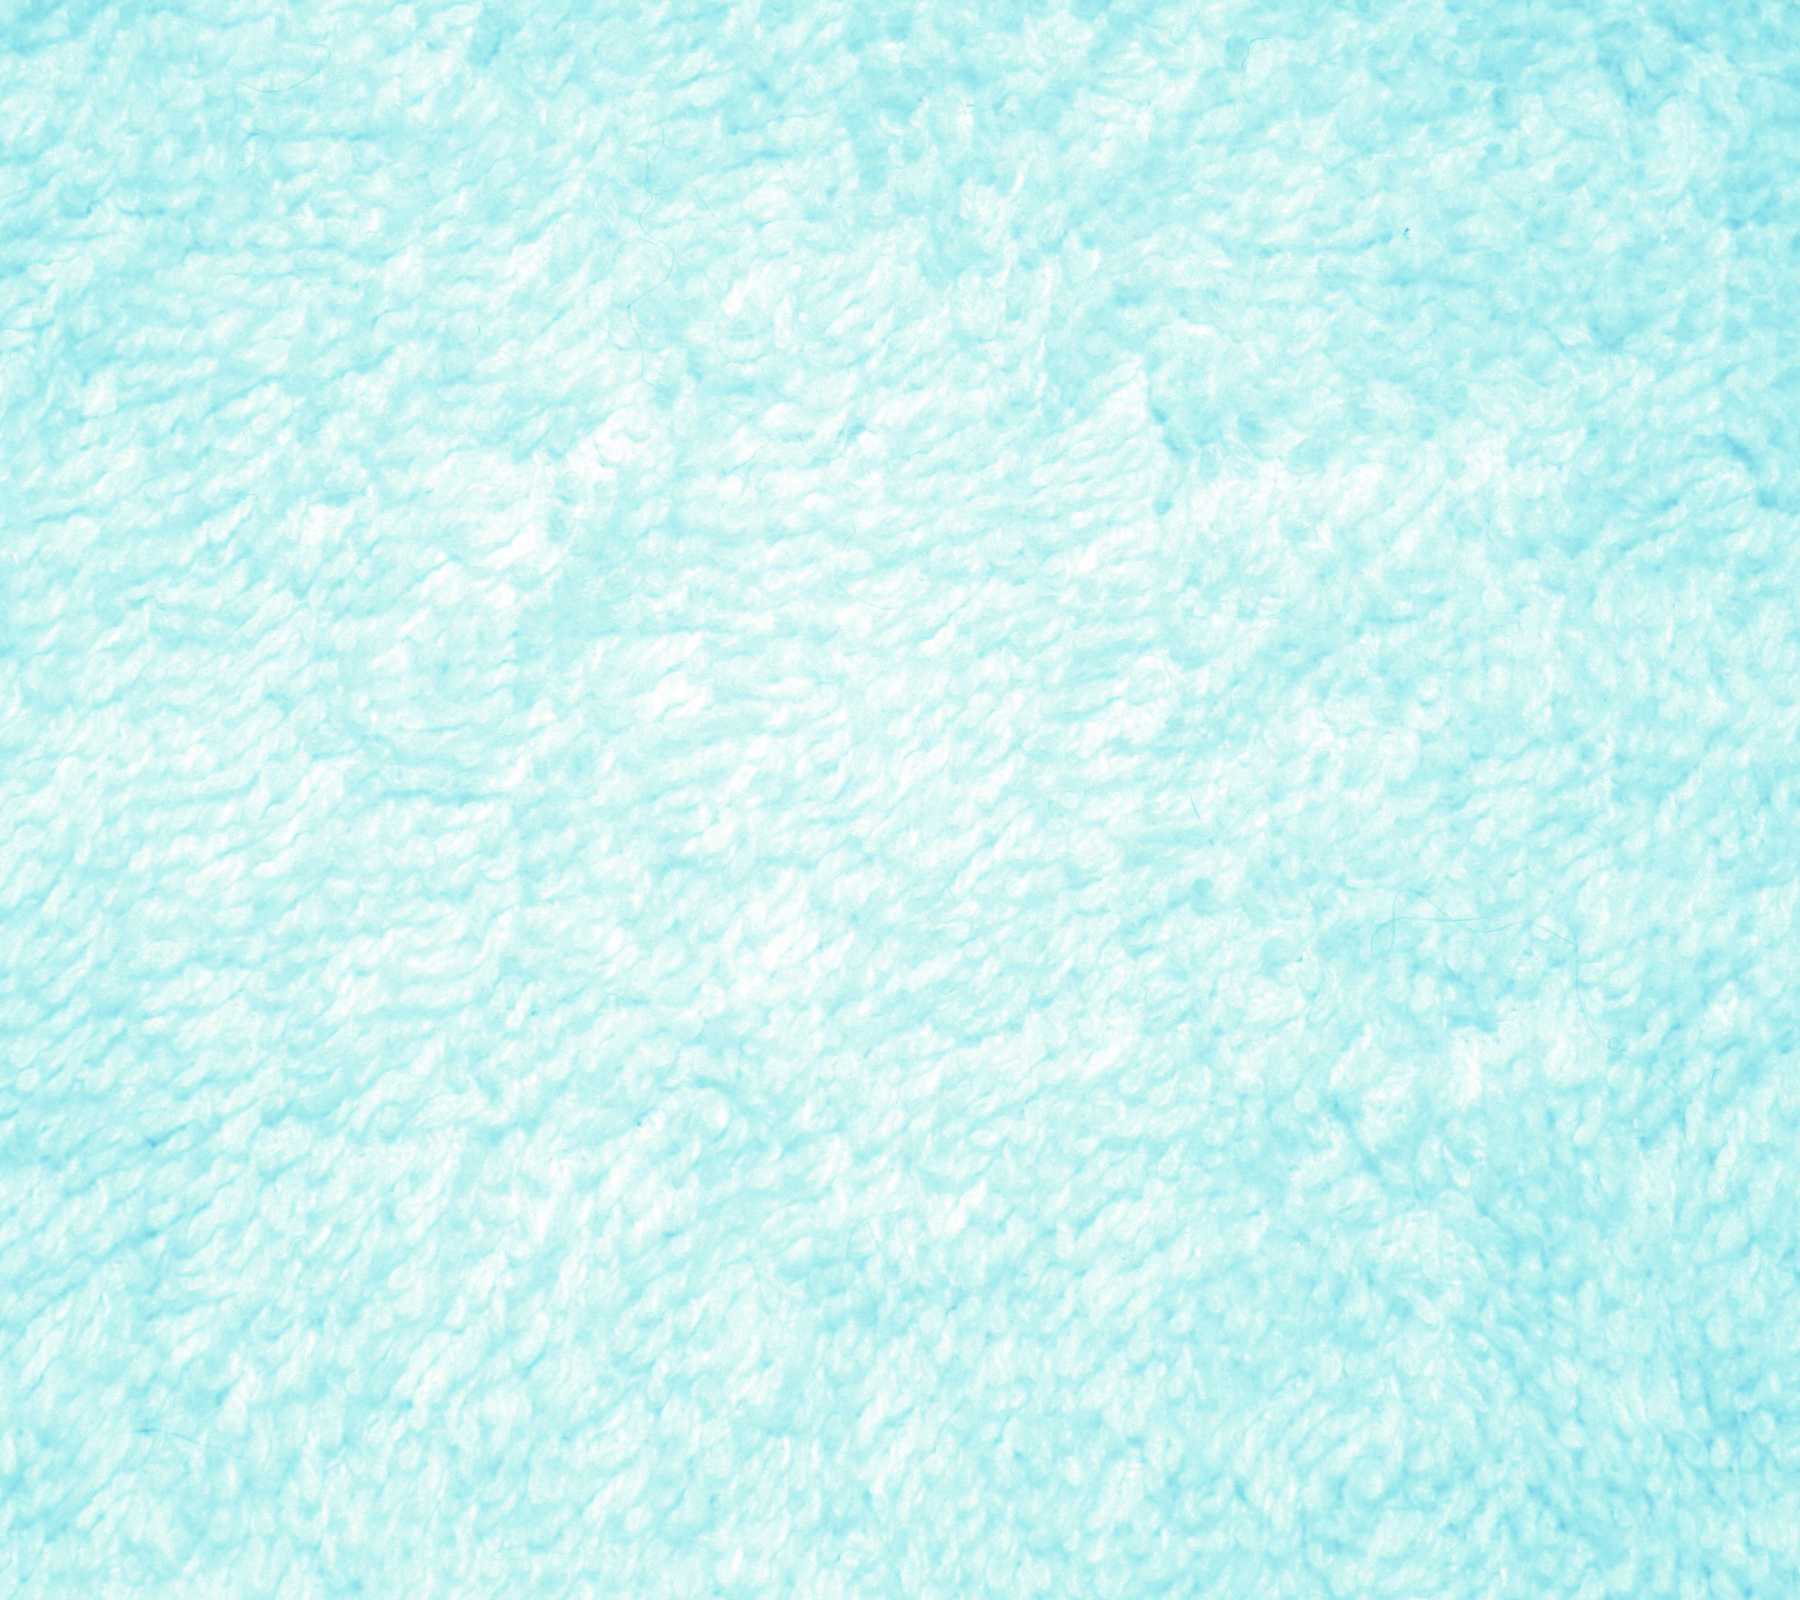 Free Teal Terry Cloth Towel 1800x1600 Background. Twitter